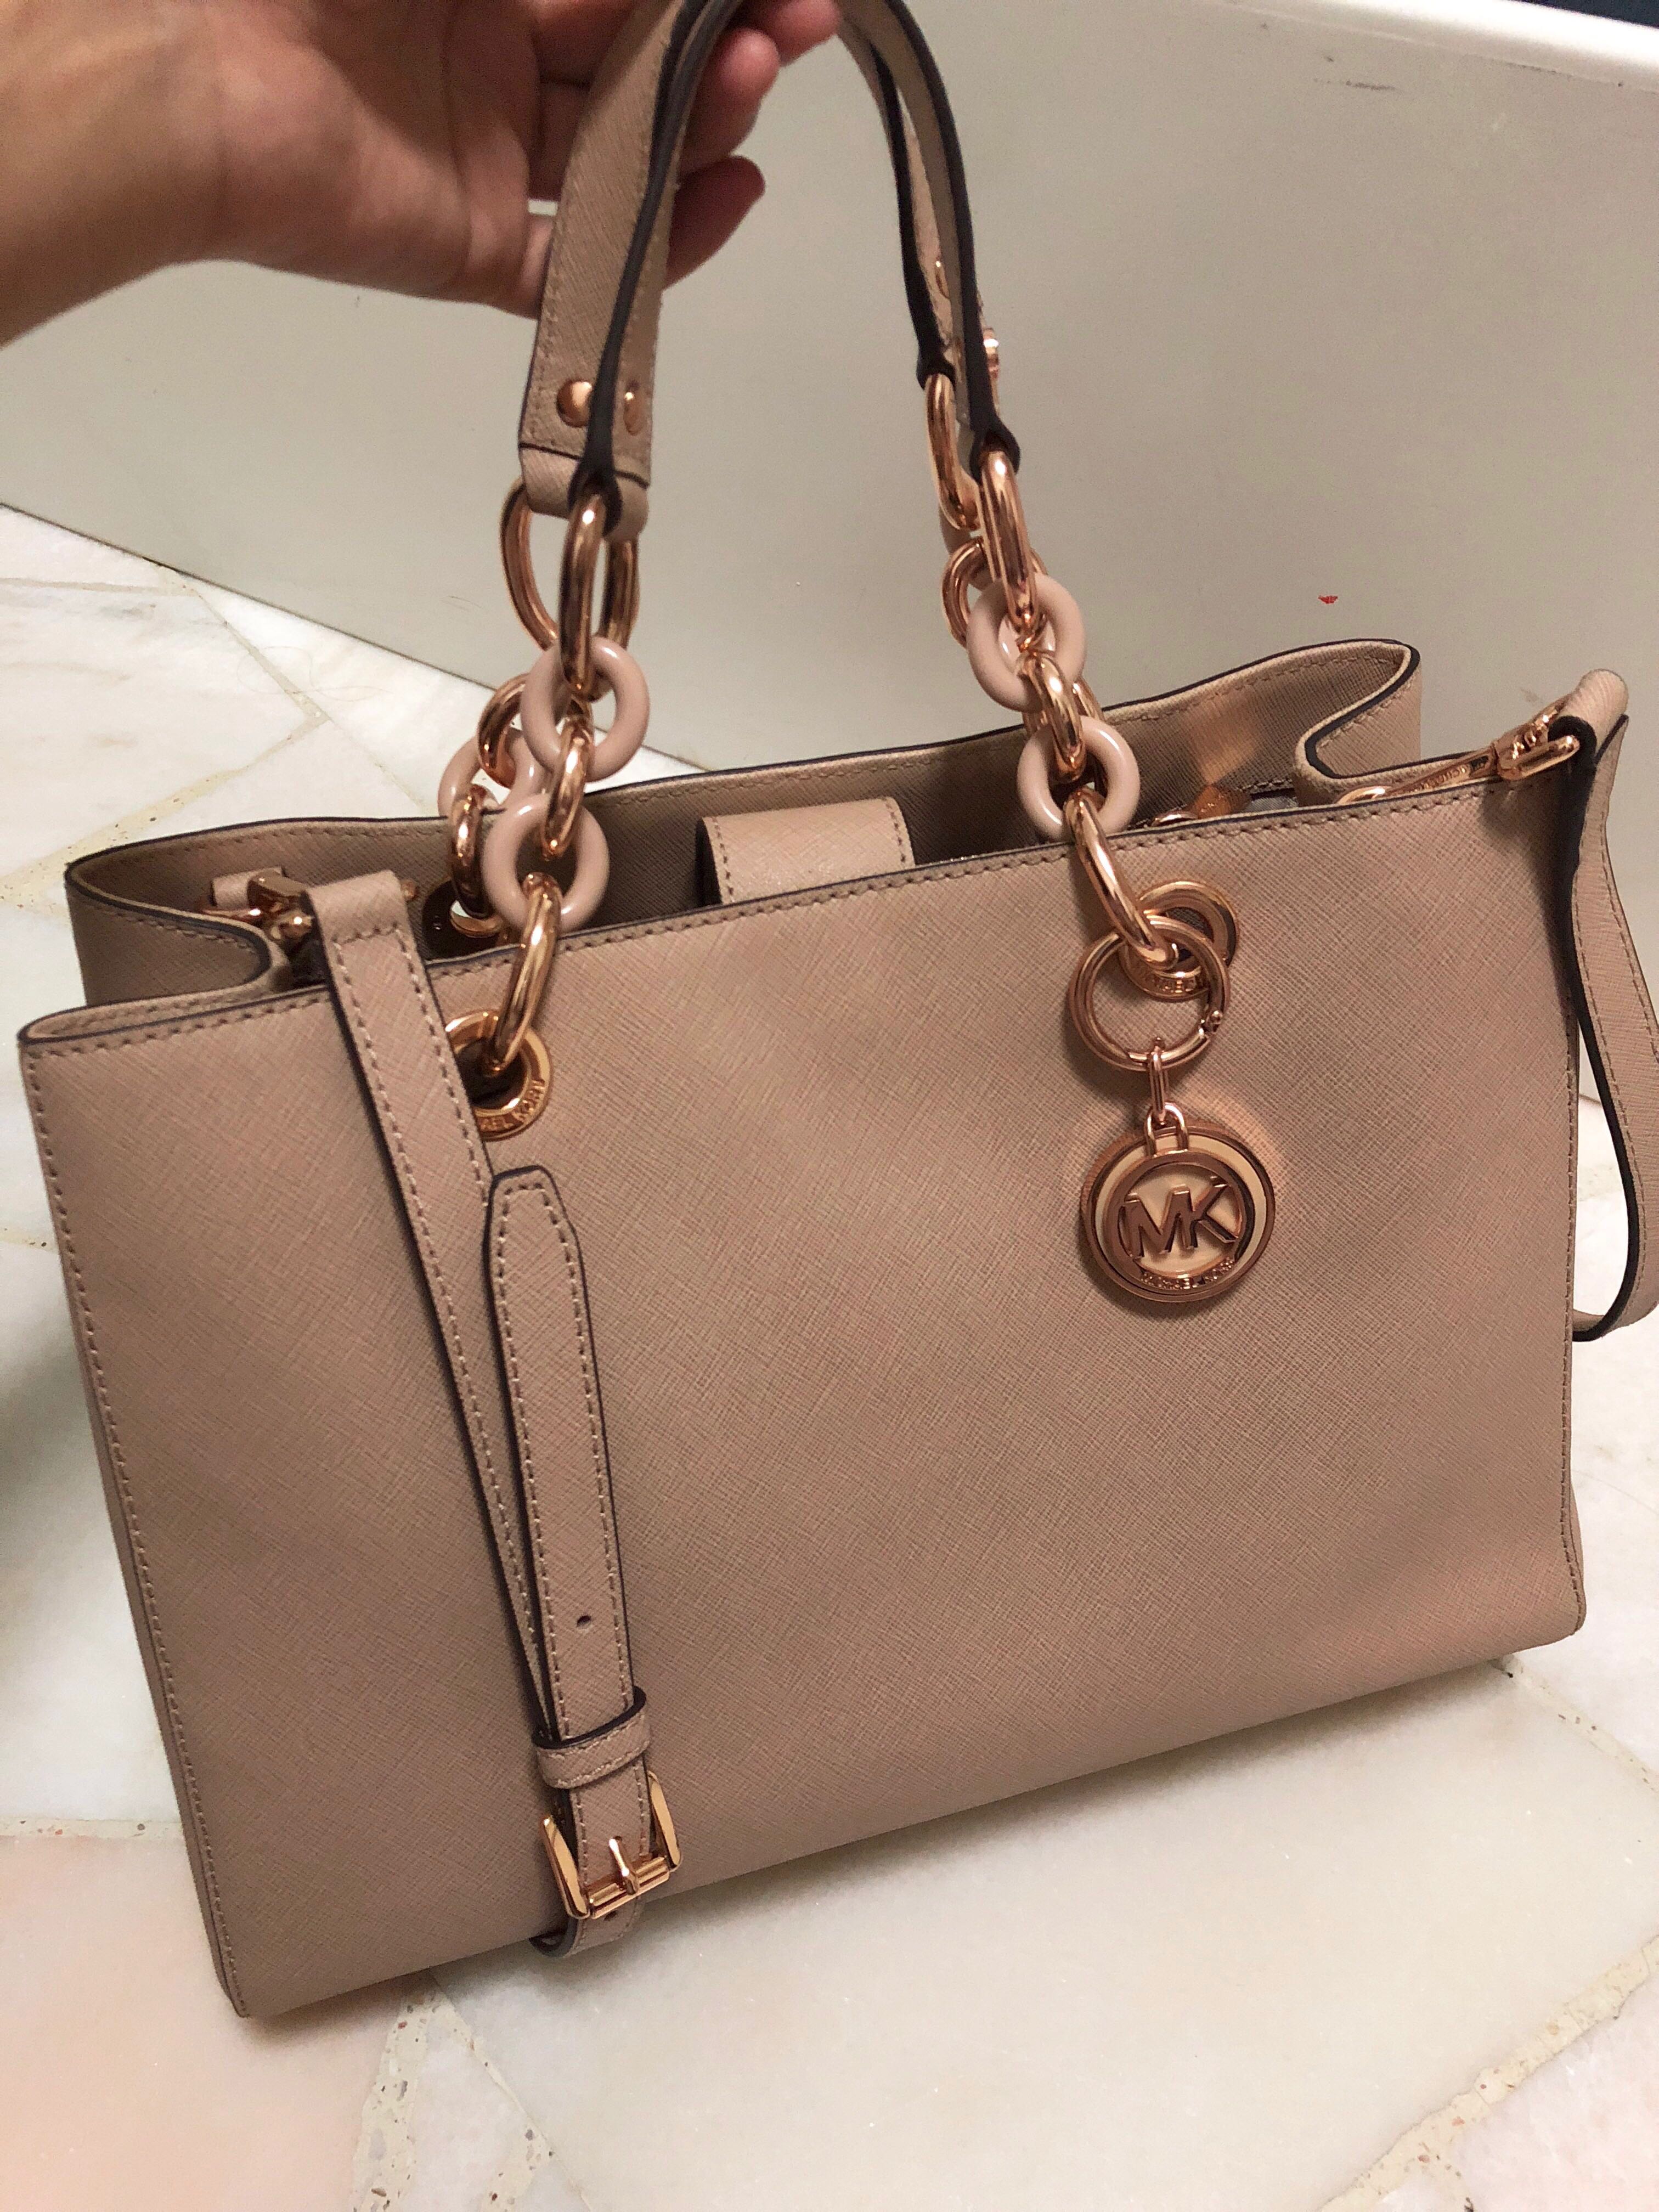 michael kors purse with roses